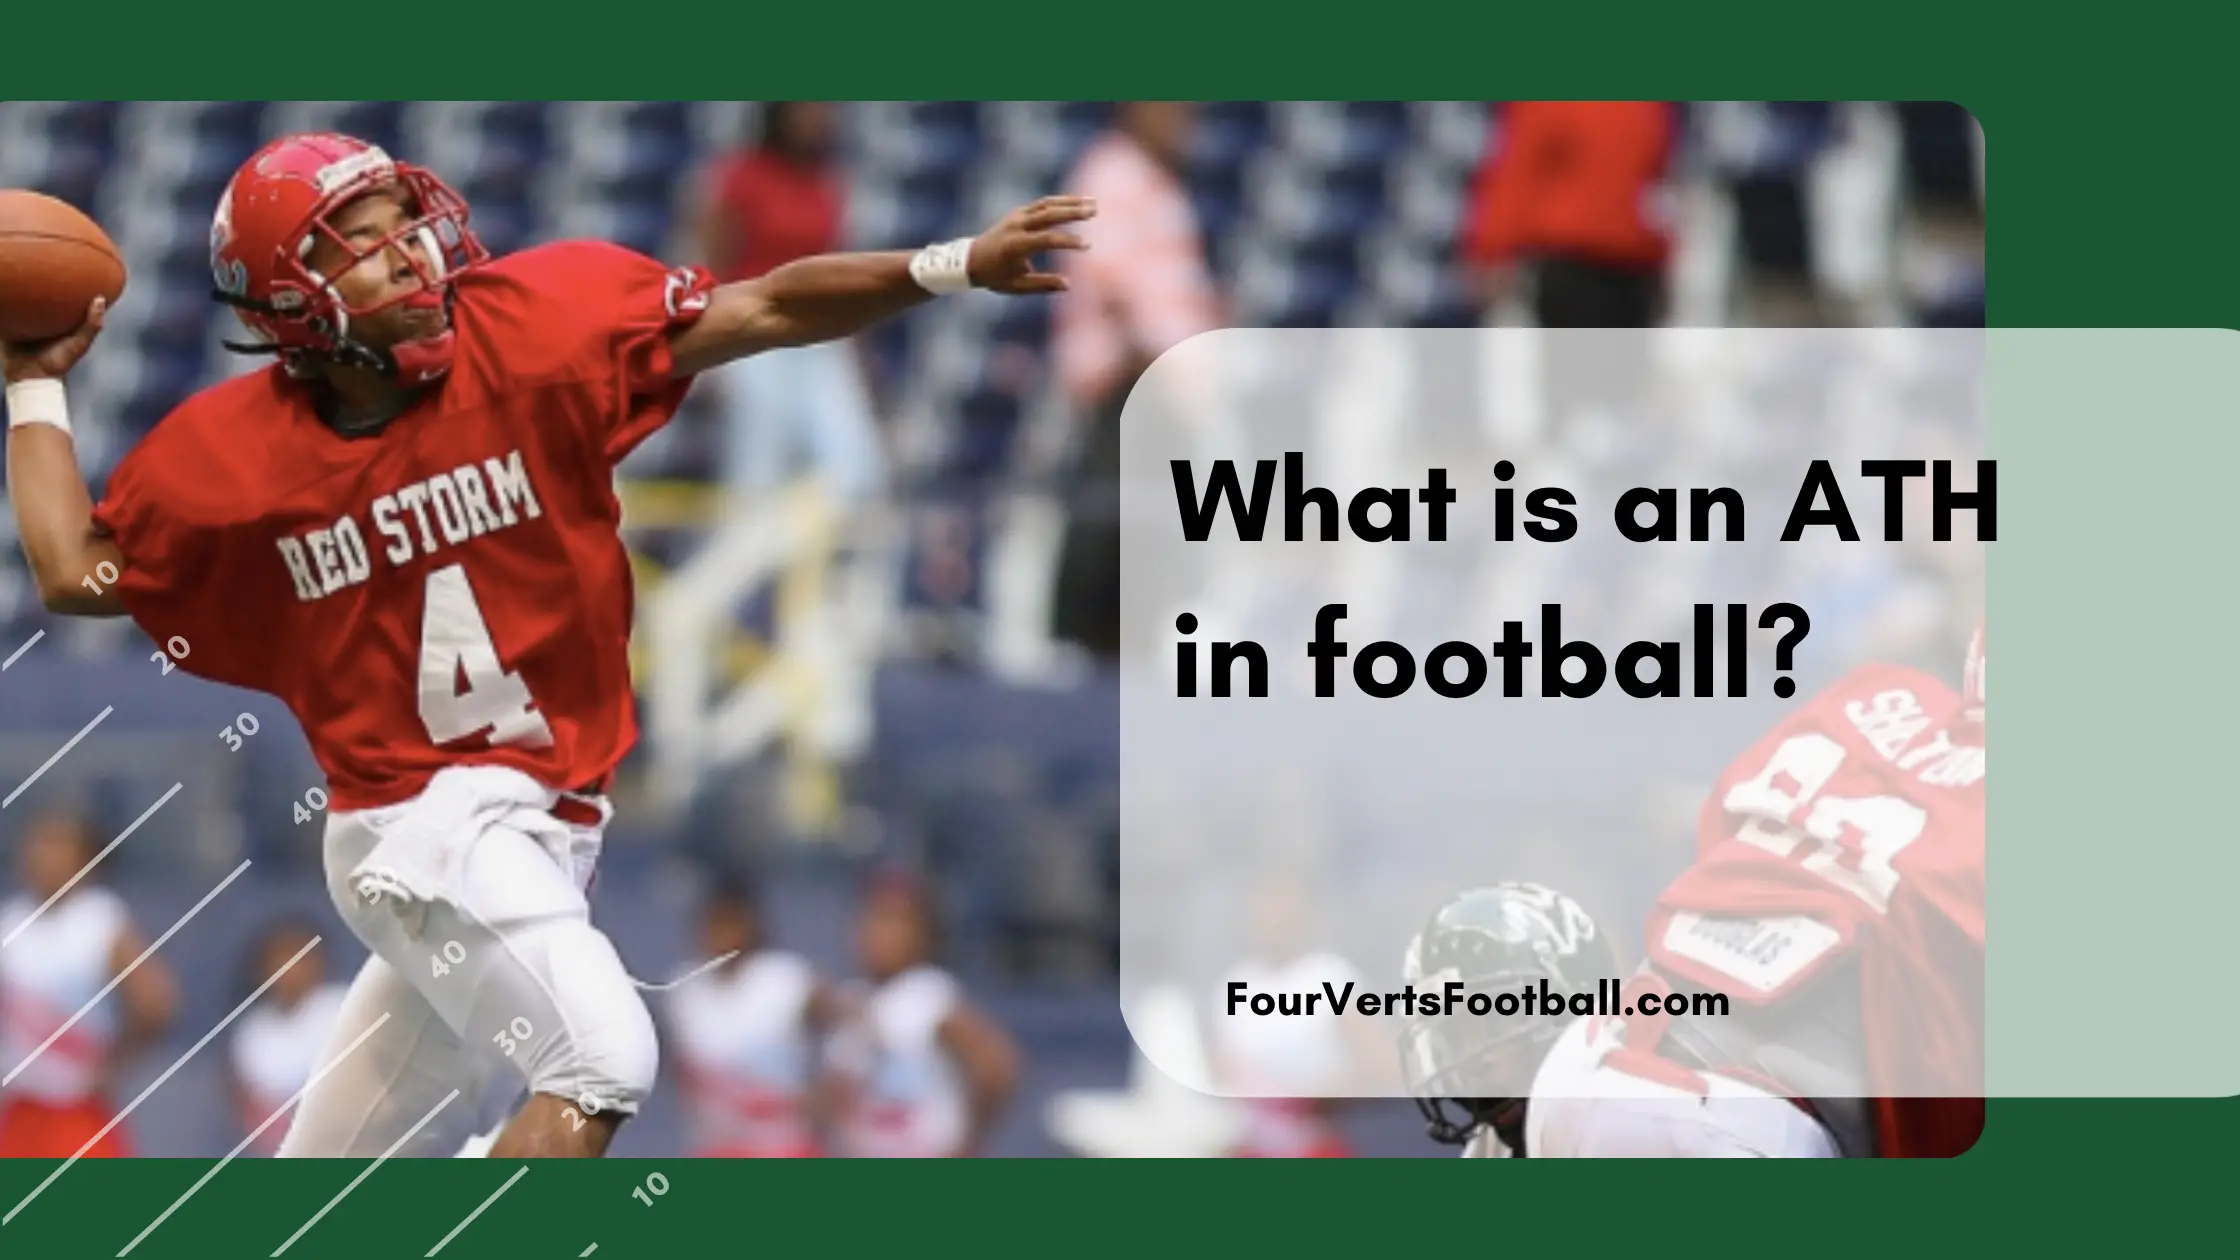 What Does ATH Stand For In Football